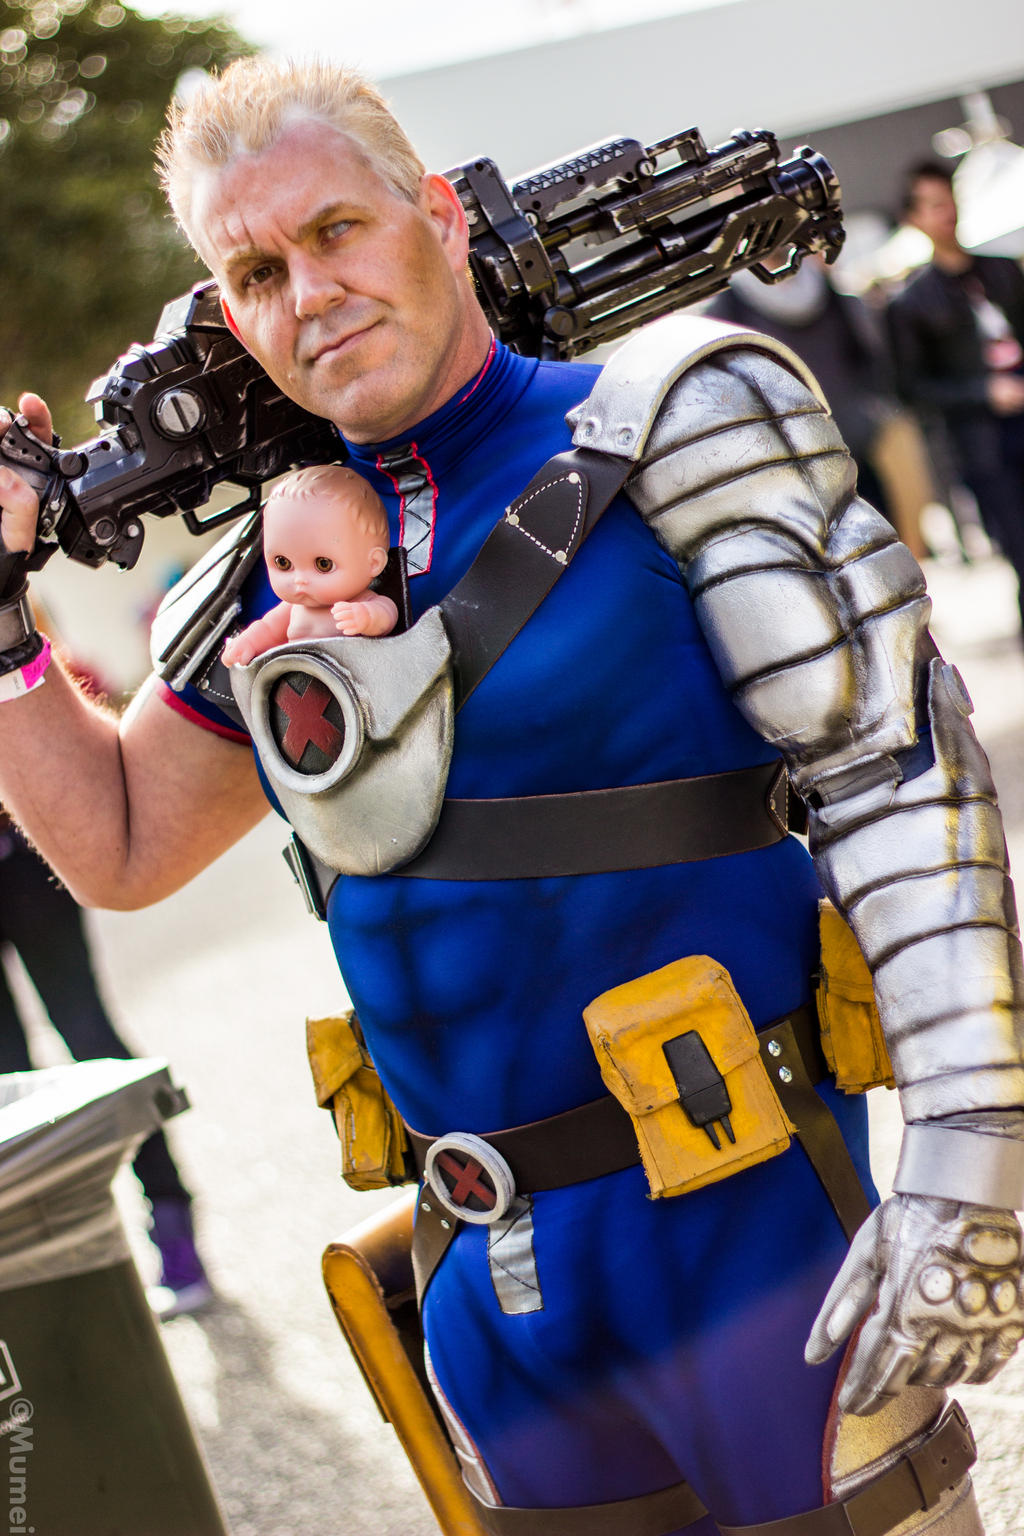 cable_cosplay_by_indogoecho-d7trwrb.jpg